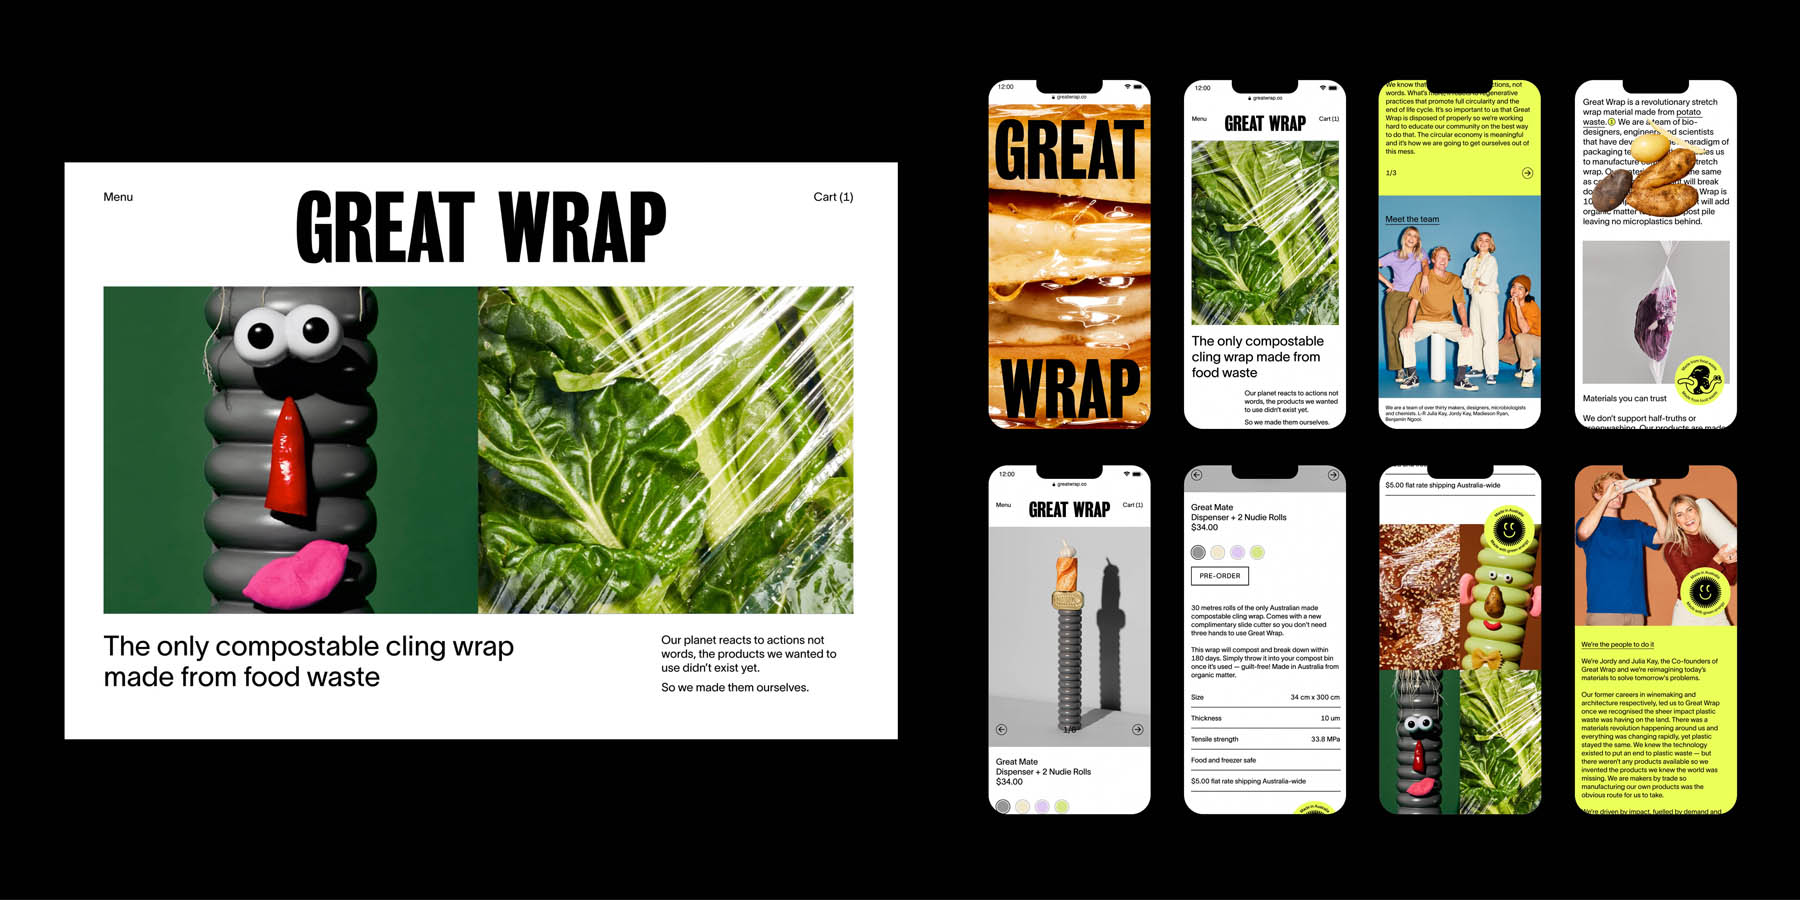 A visual summary of the Great Wrap website for desktop and mobile.